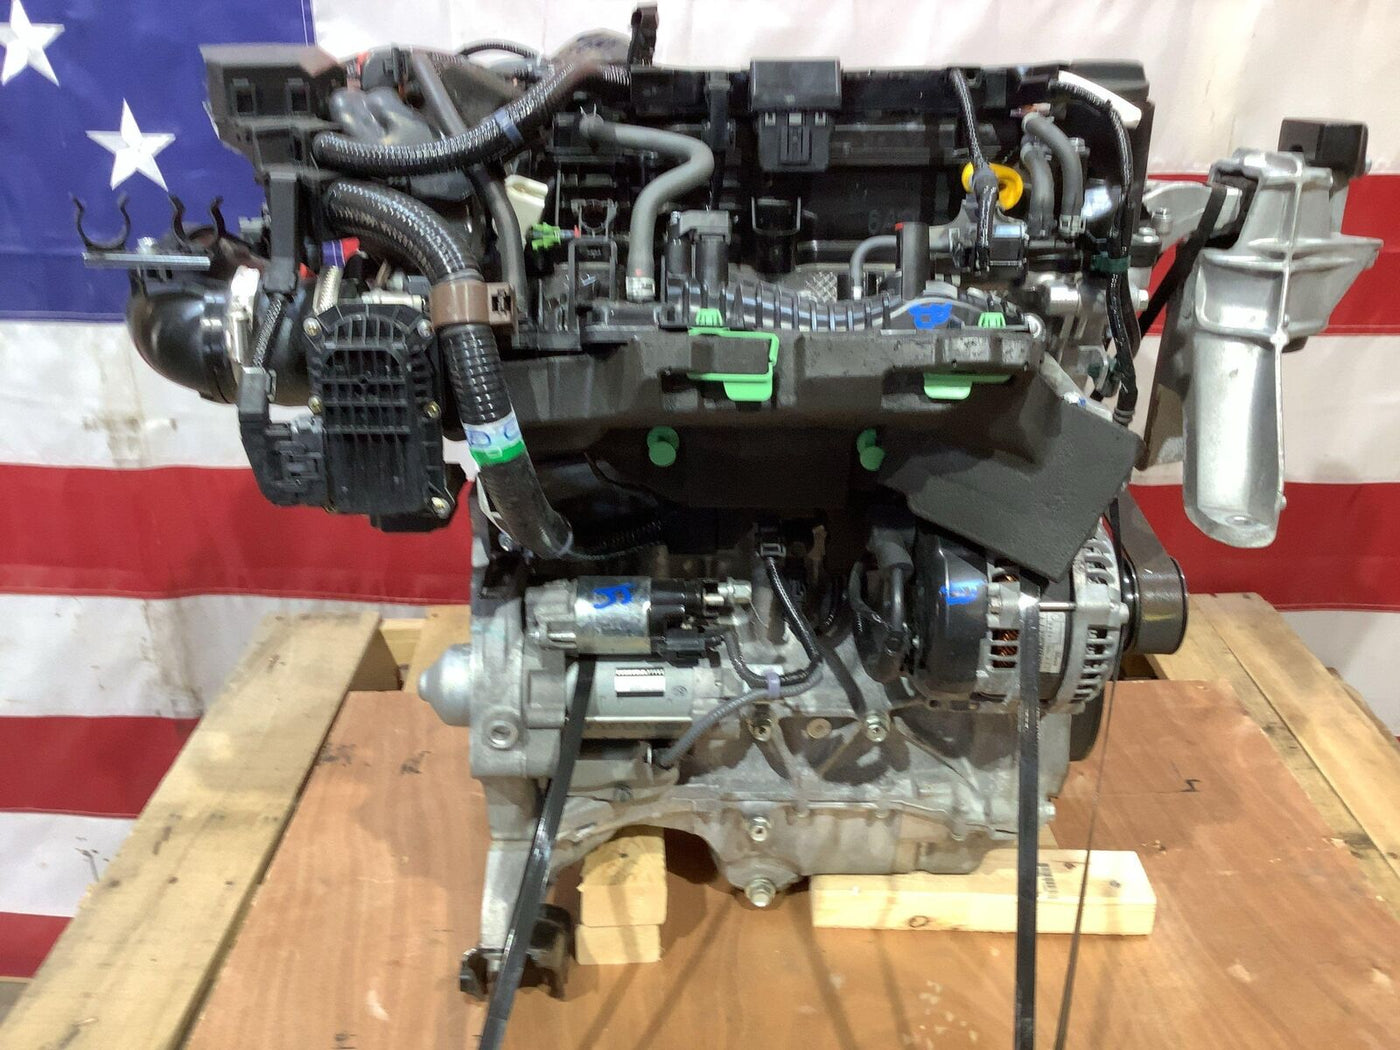 2023 Acura Integra A-Spec 1.5L 200HP Engine Dropout Swap W/ Turbo (19K) Tested